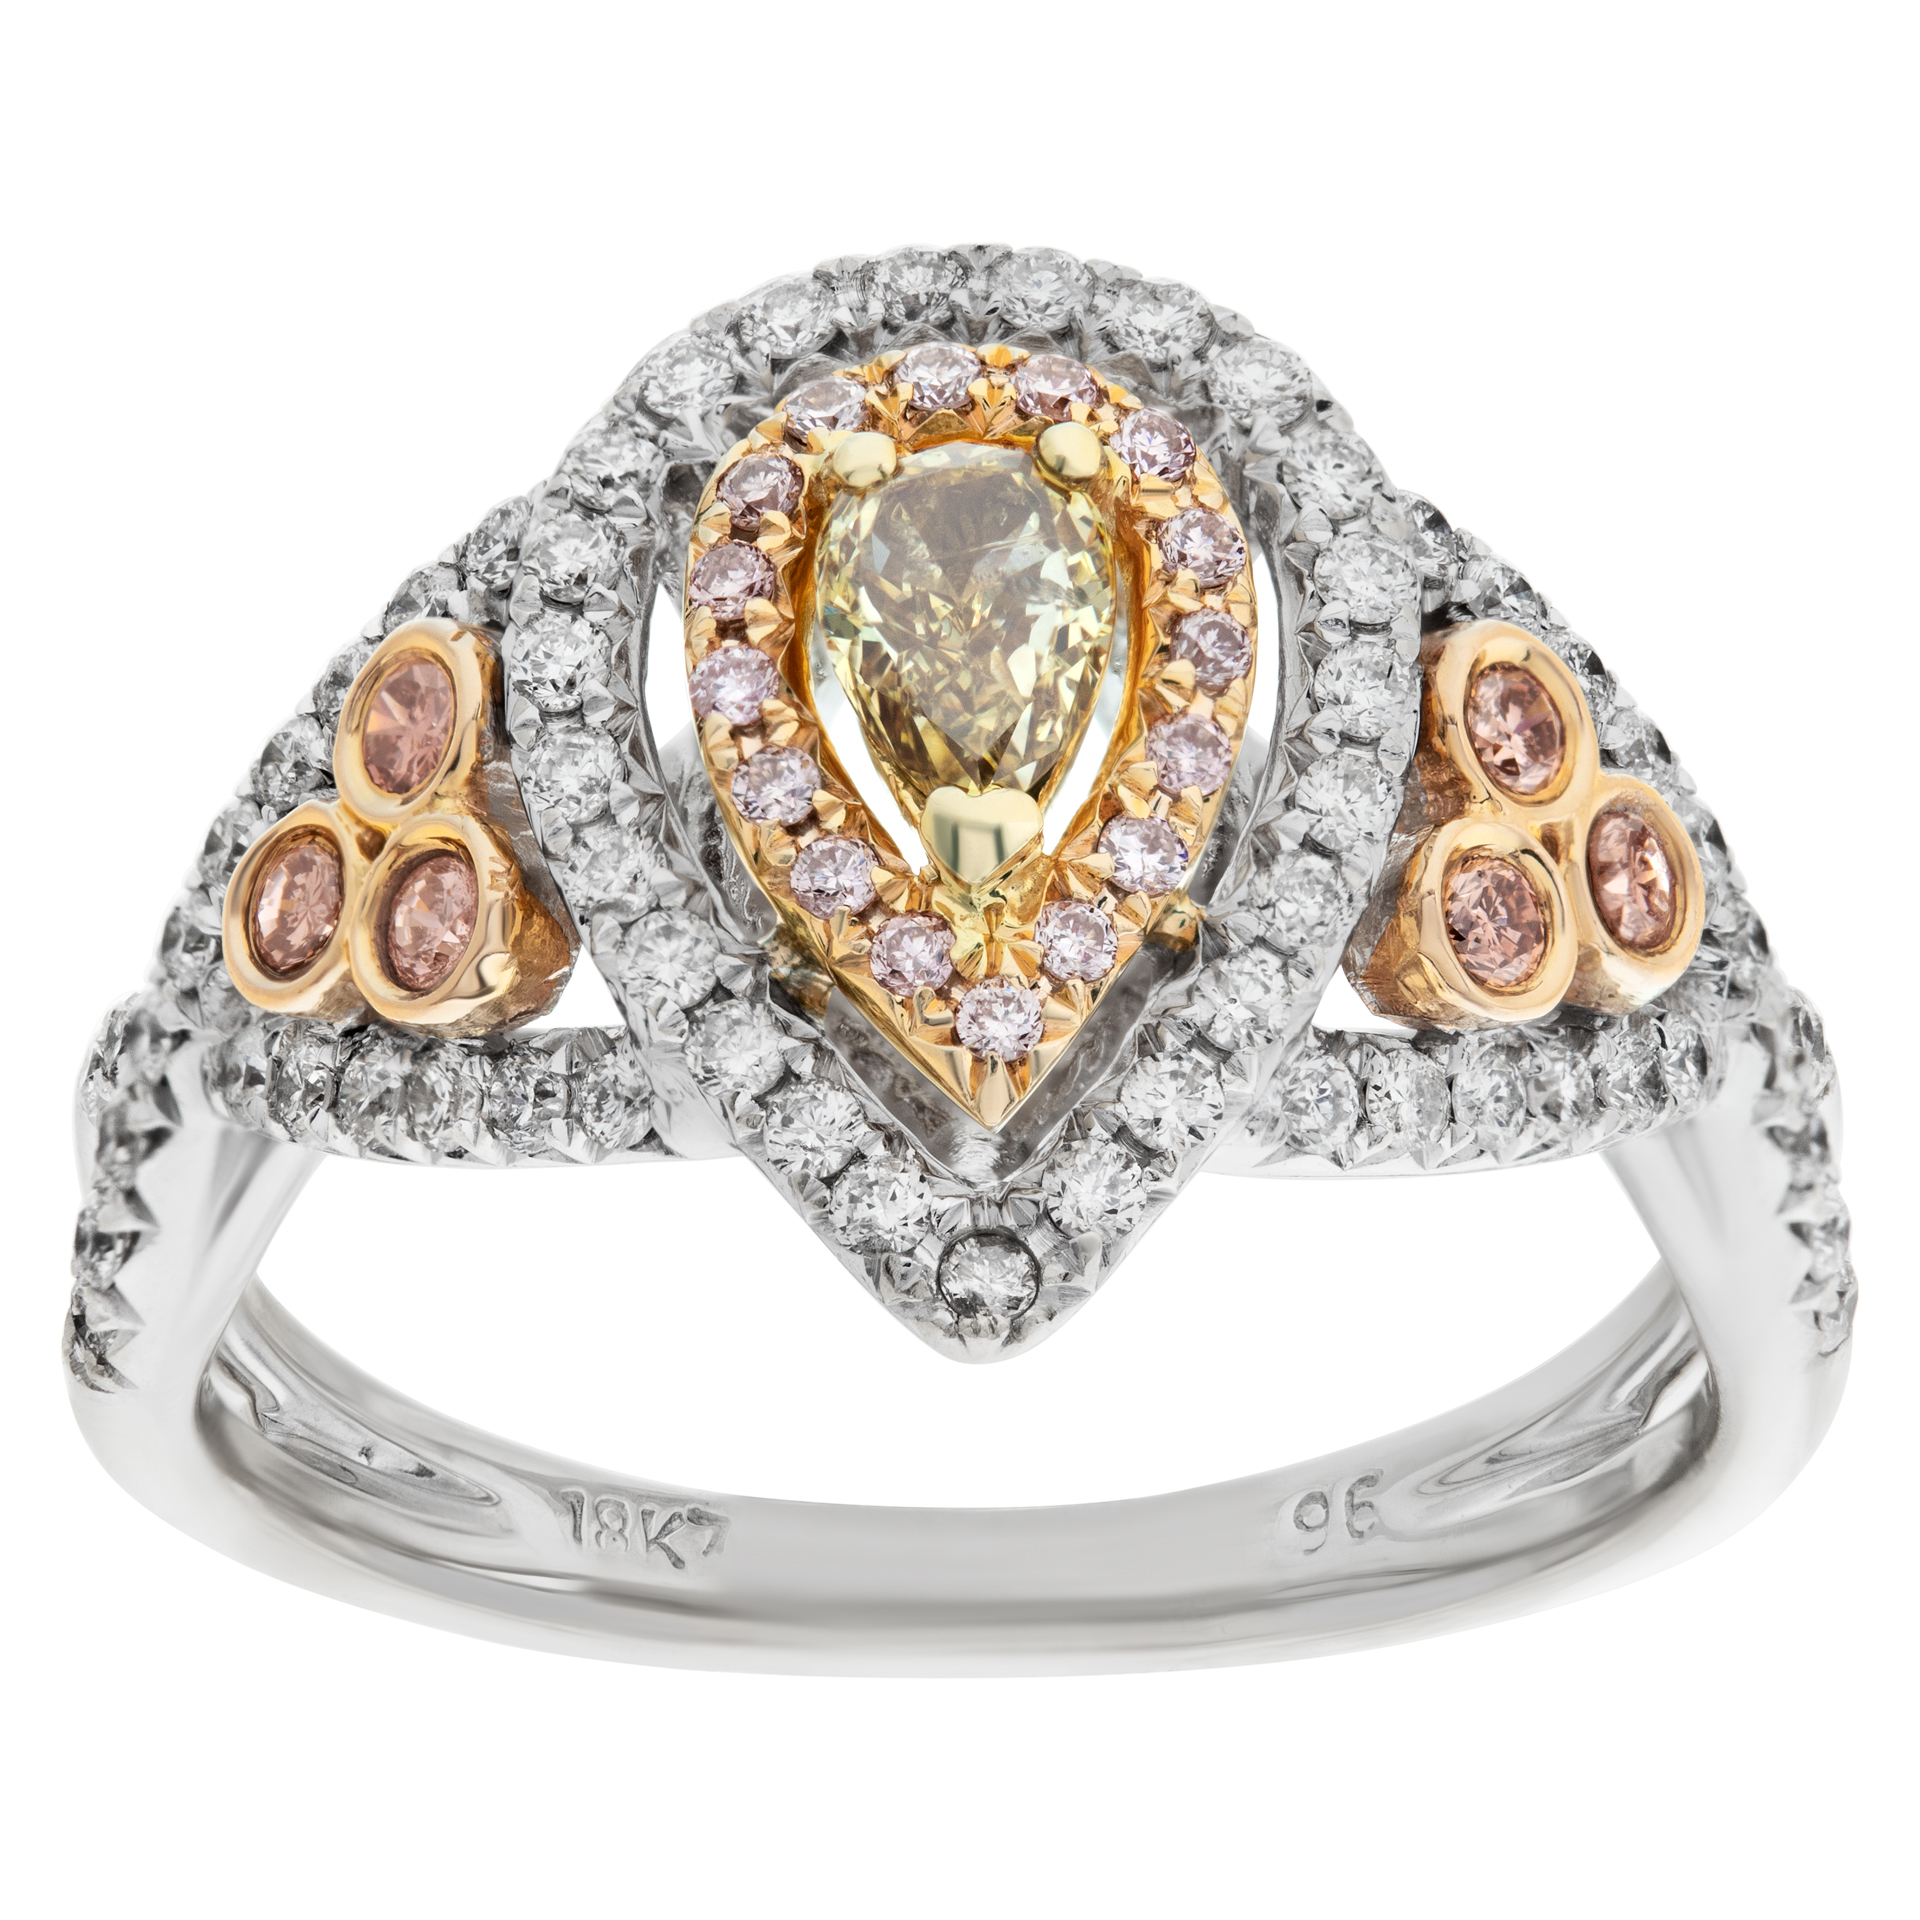 Pear shape center diamond ring with micro pave set in 18k. 2.00 carats. Size 6 1/4